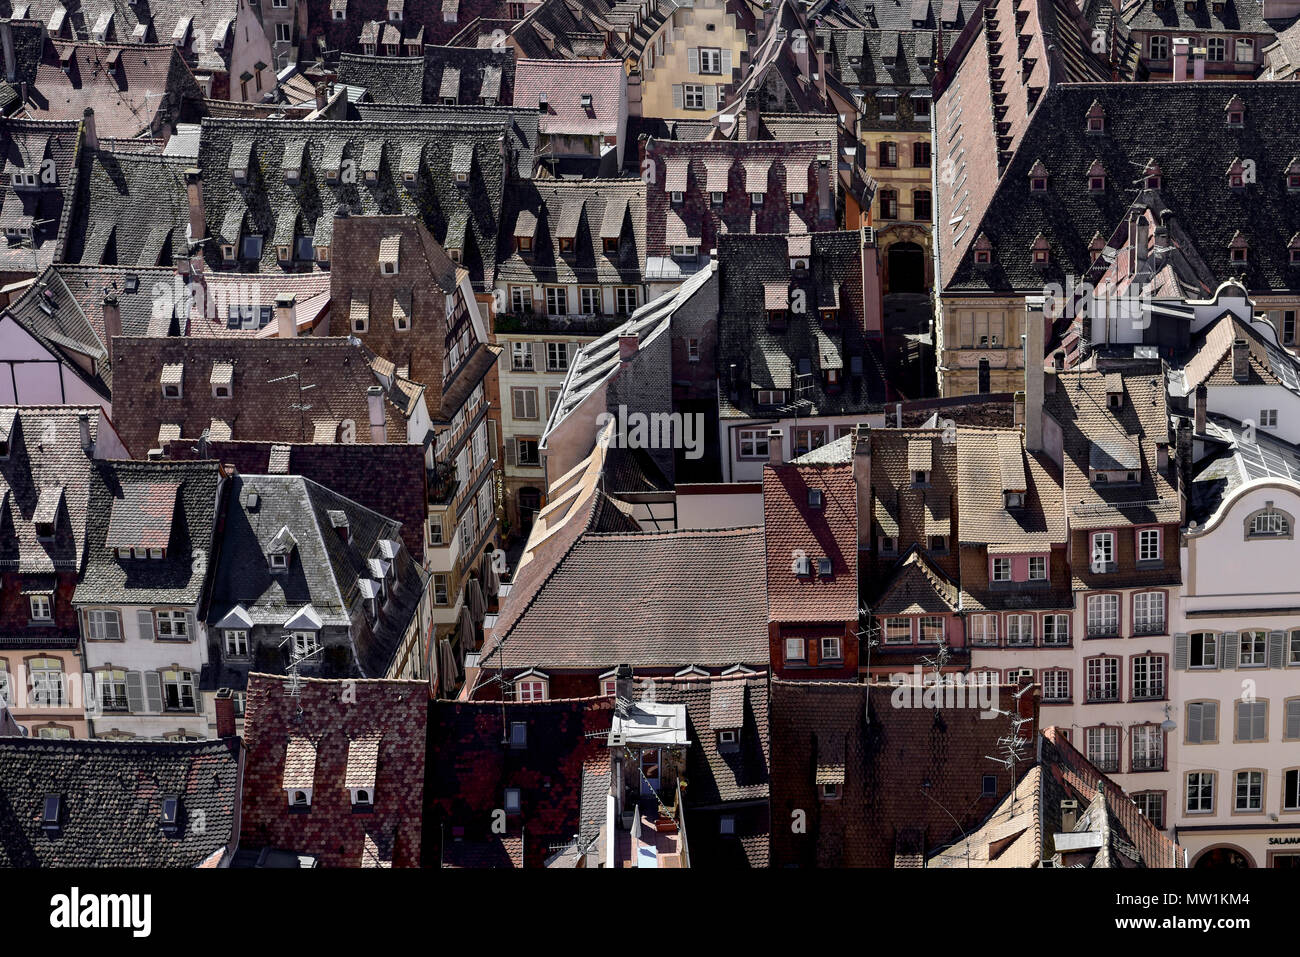 Roofs, Old Town, Strasbourg, France Stock Photo